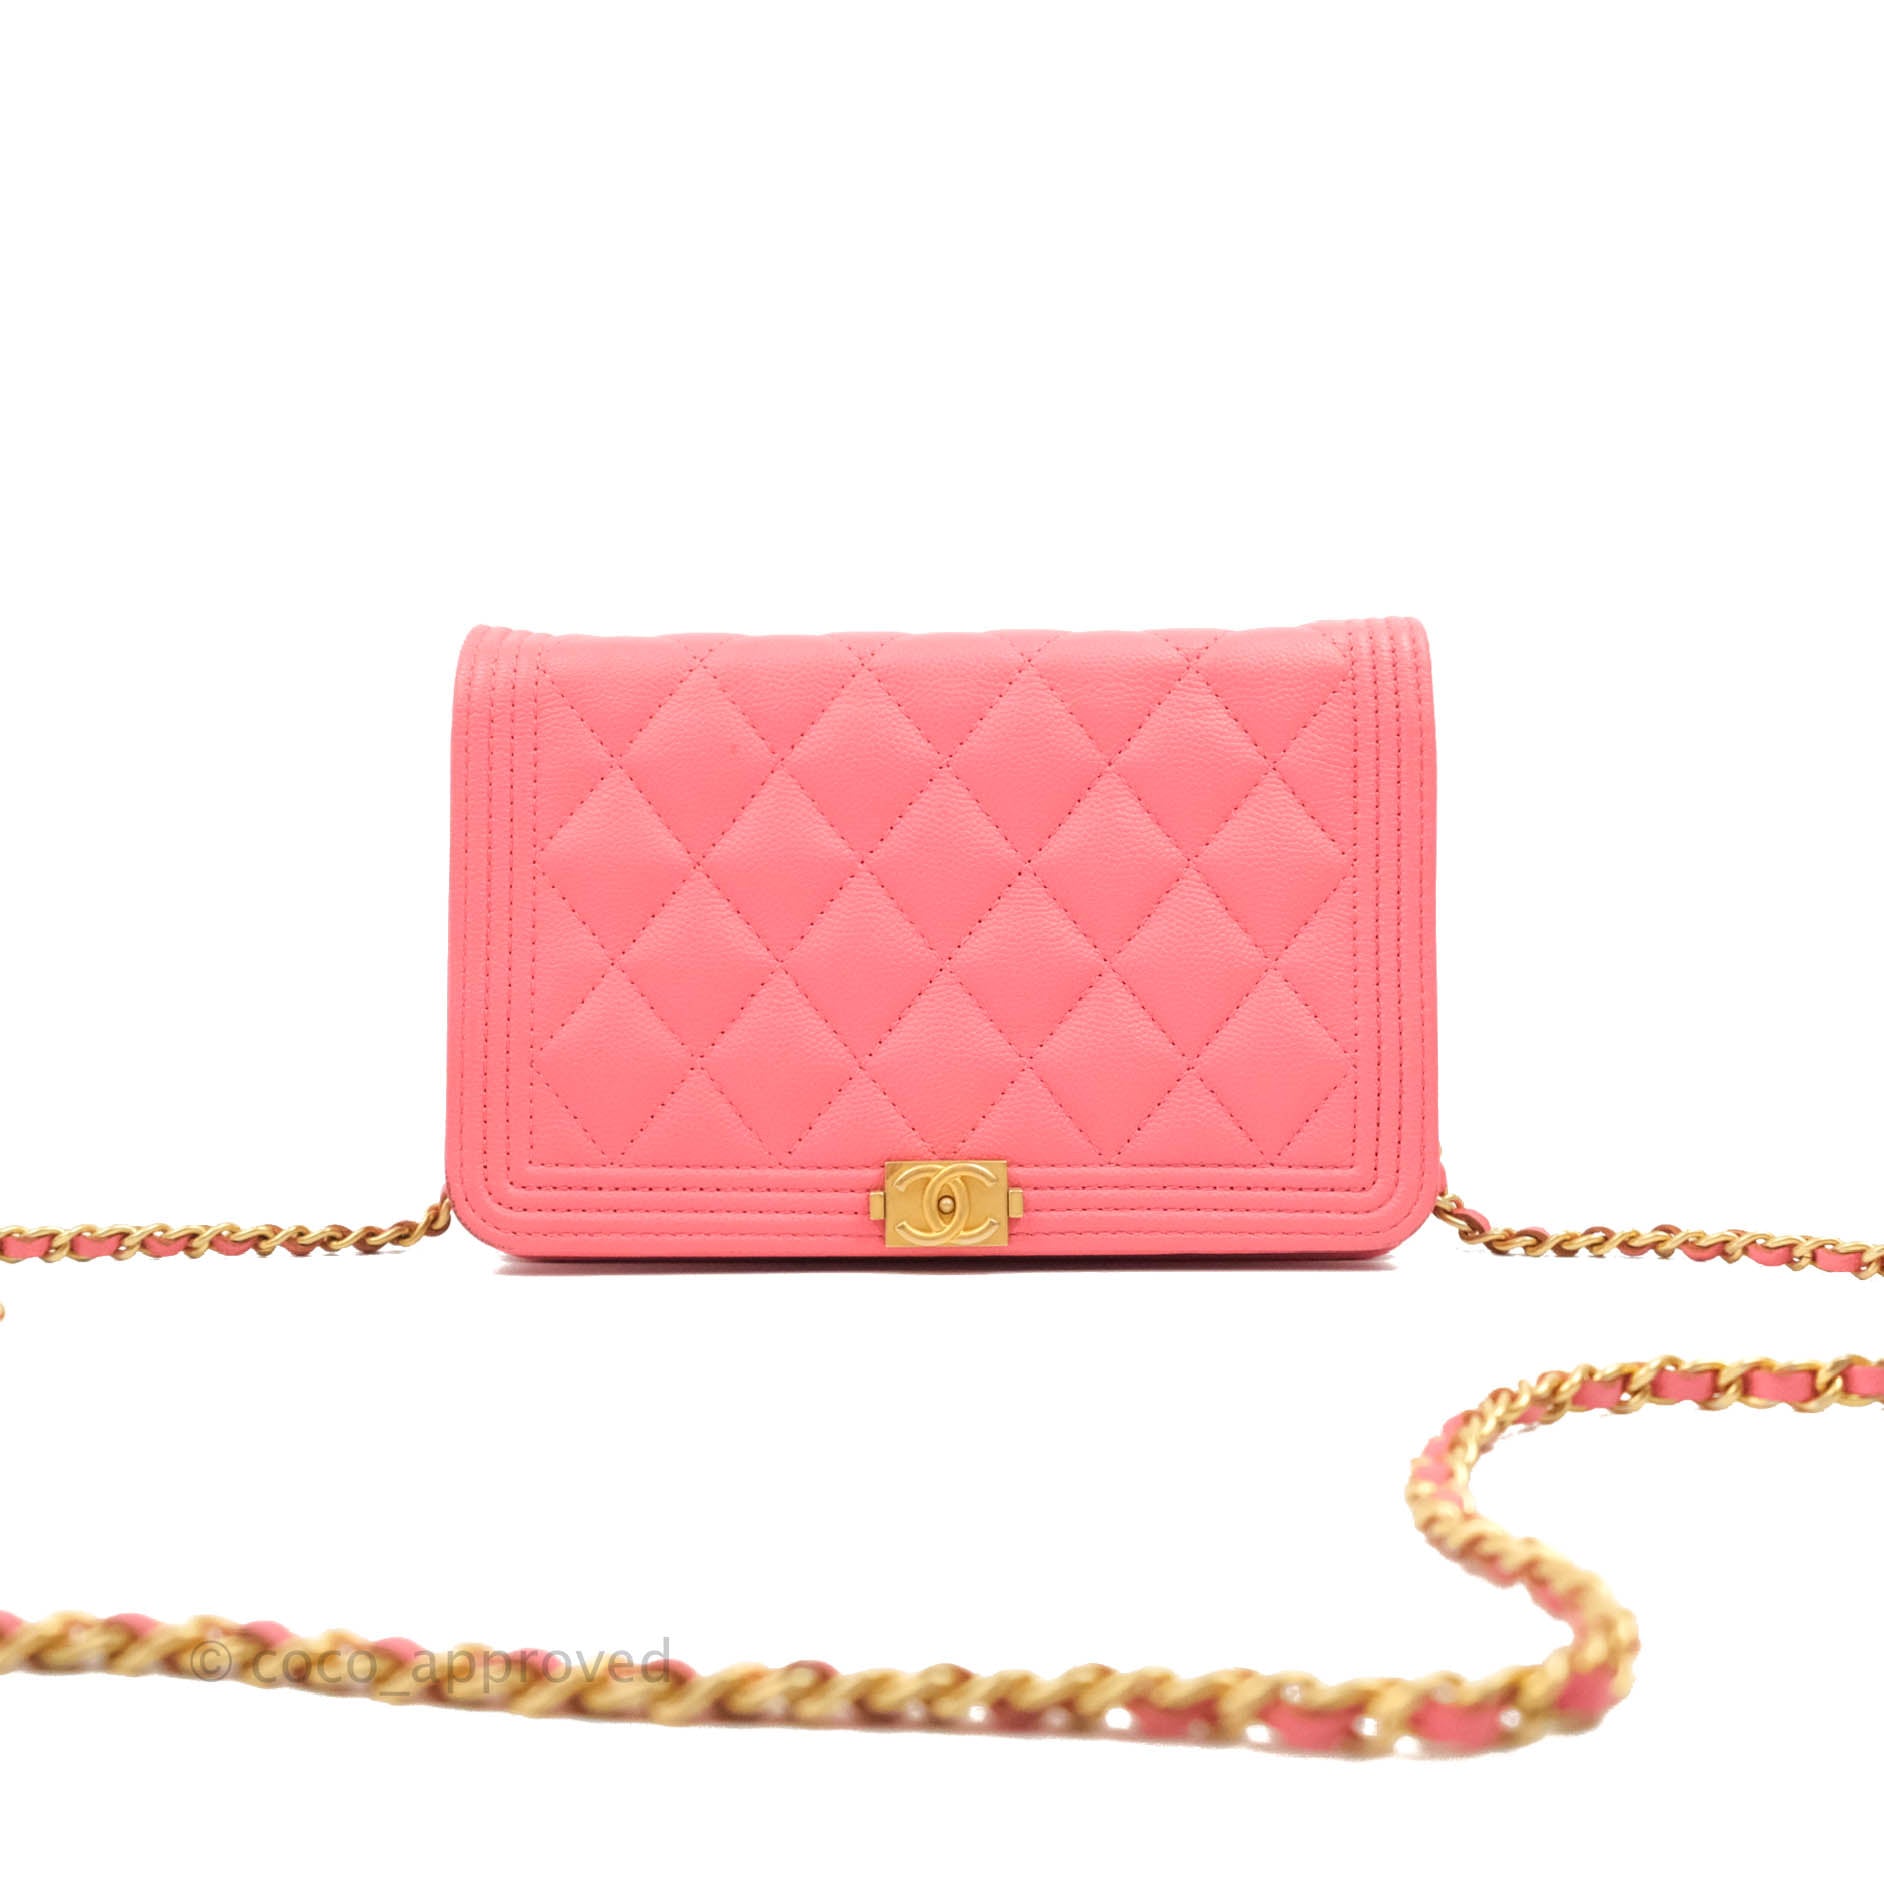 Sold at Auction: CHANEL Pink Caviar Leather Wallet on Chain